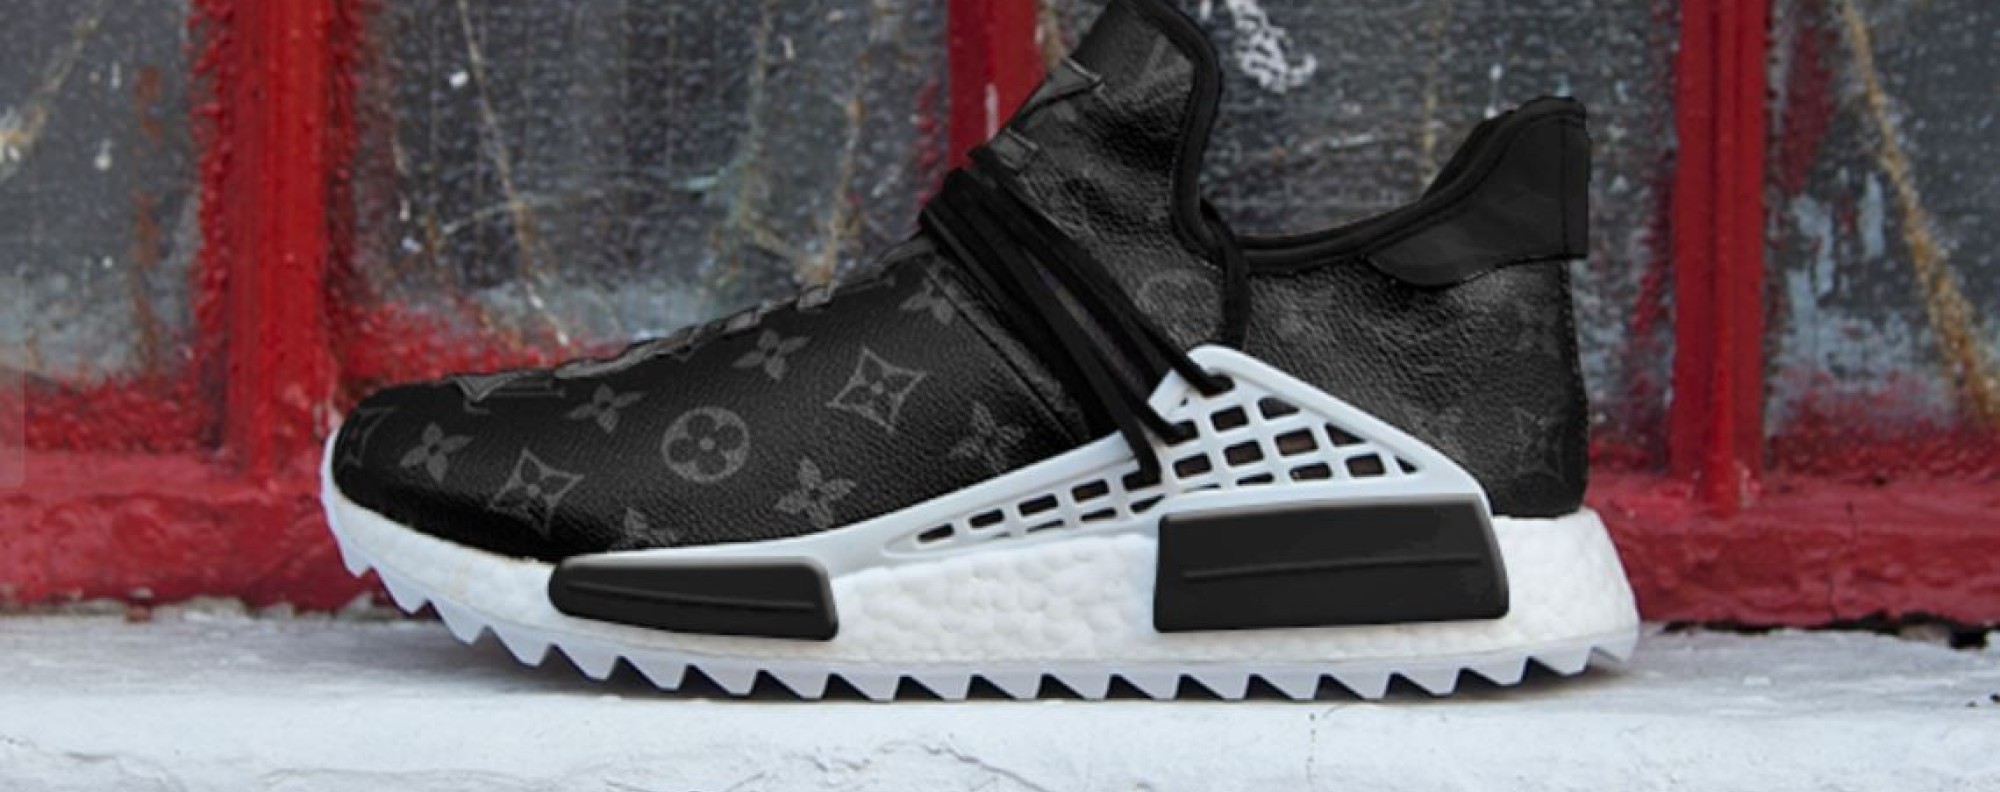 Louis Vuitton x adidas 'Eclipse' NMD Hu puts other sneakers in the shade China Morning